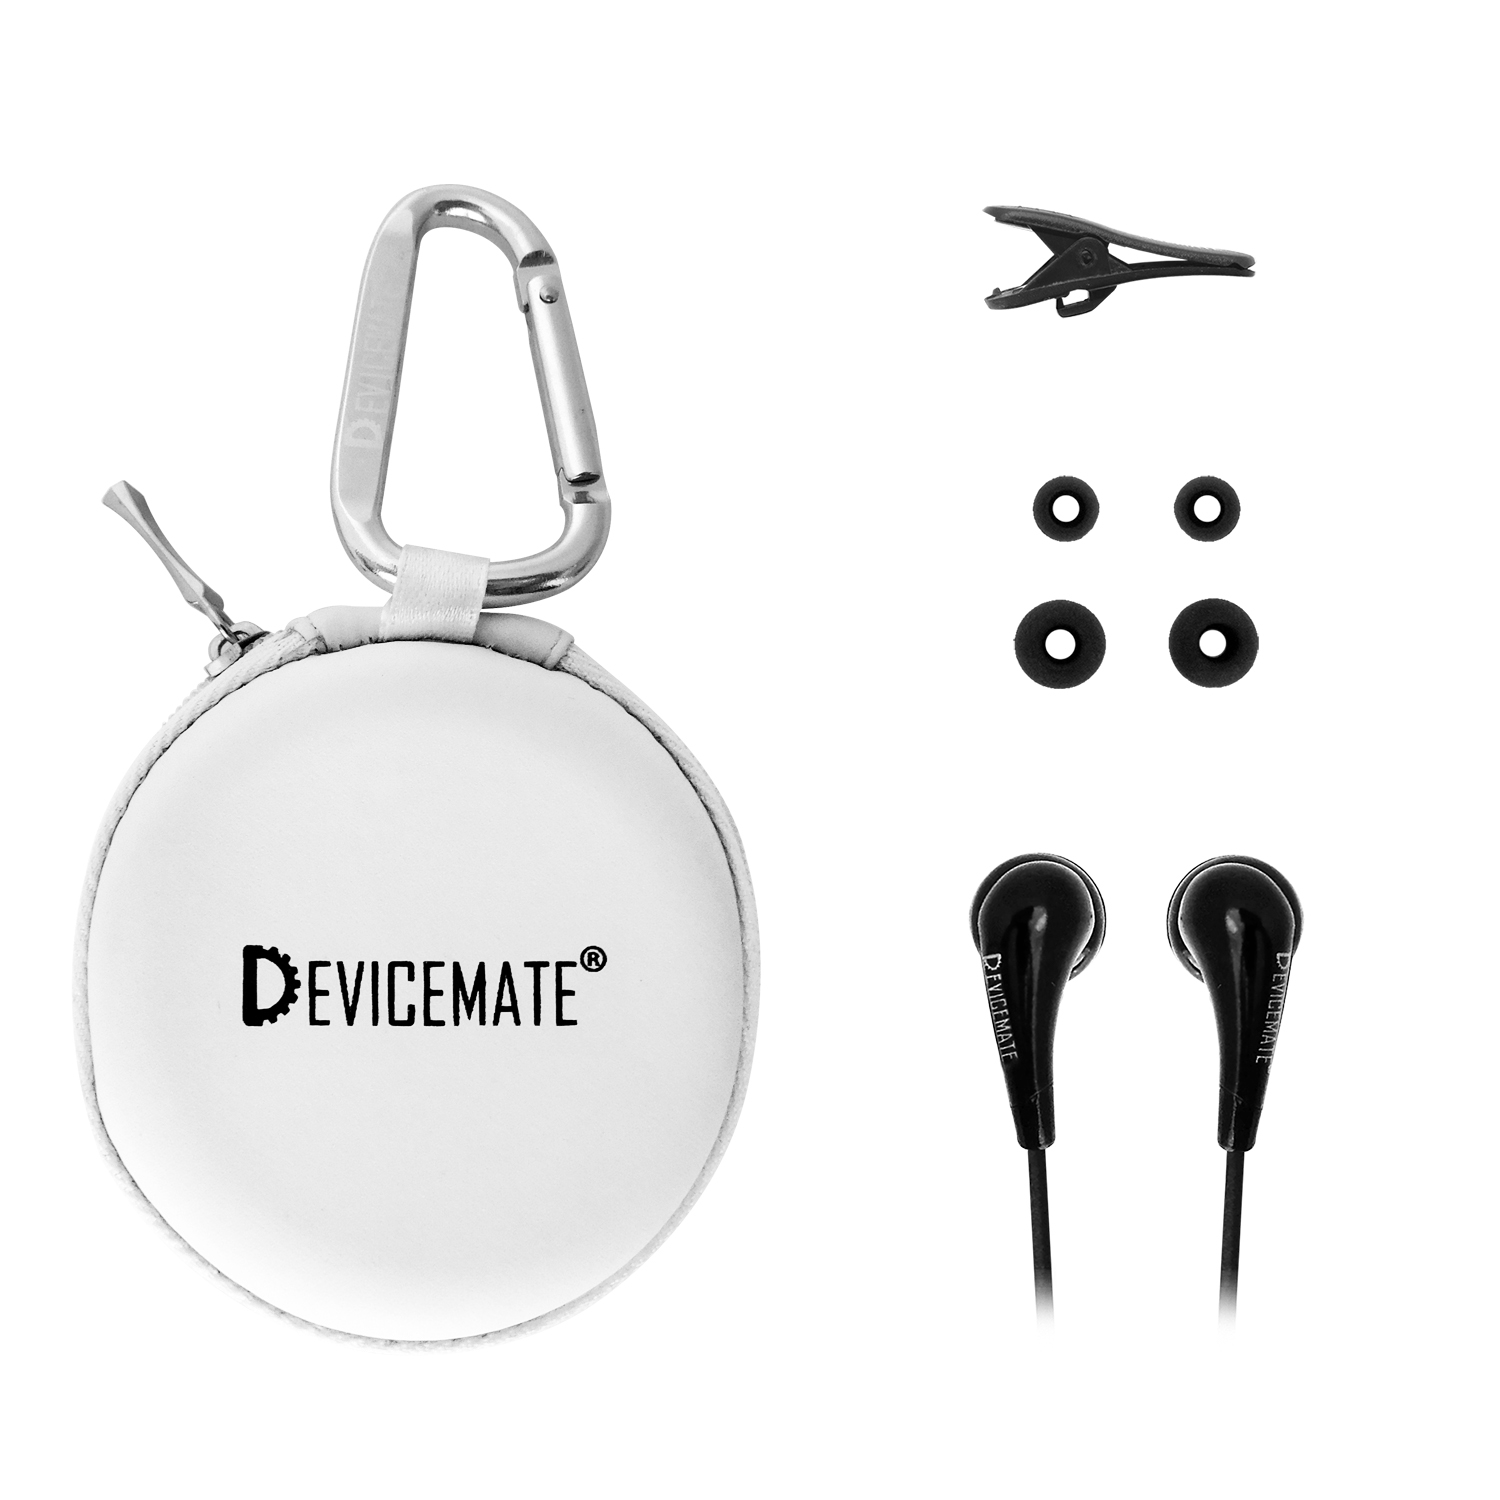 DEVICEMATE®SD 255-GWT In-Ear Stereo Earphones Glacier White Case